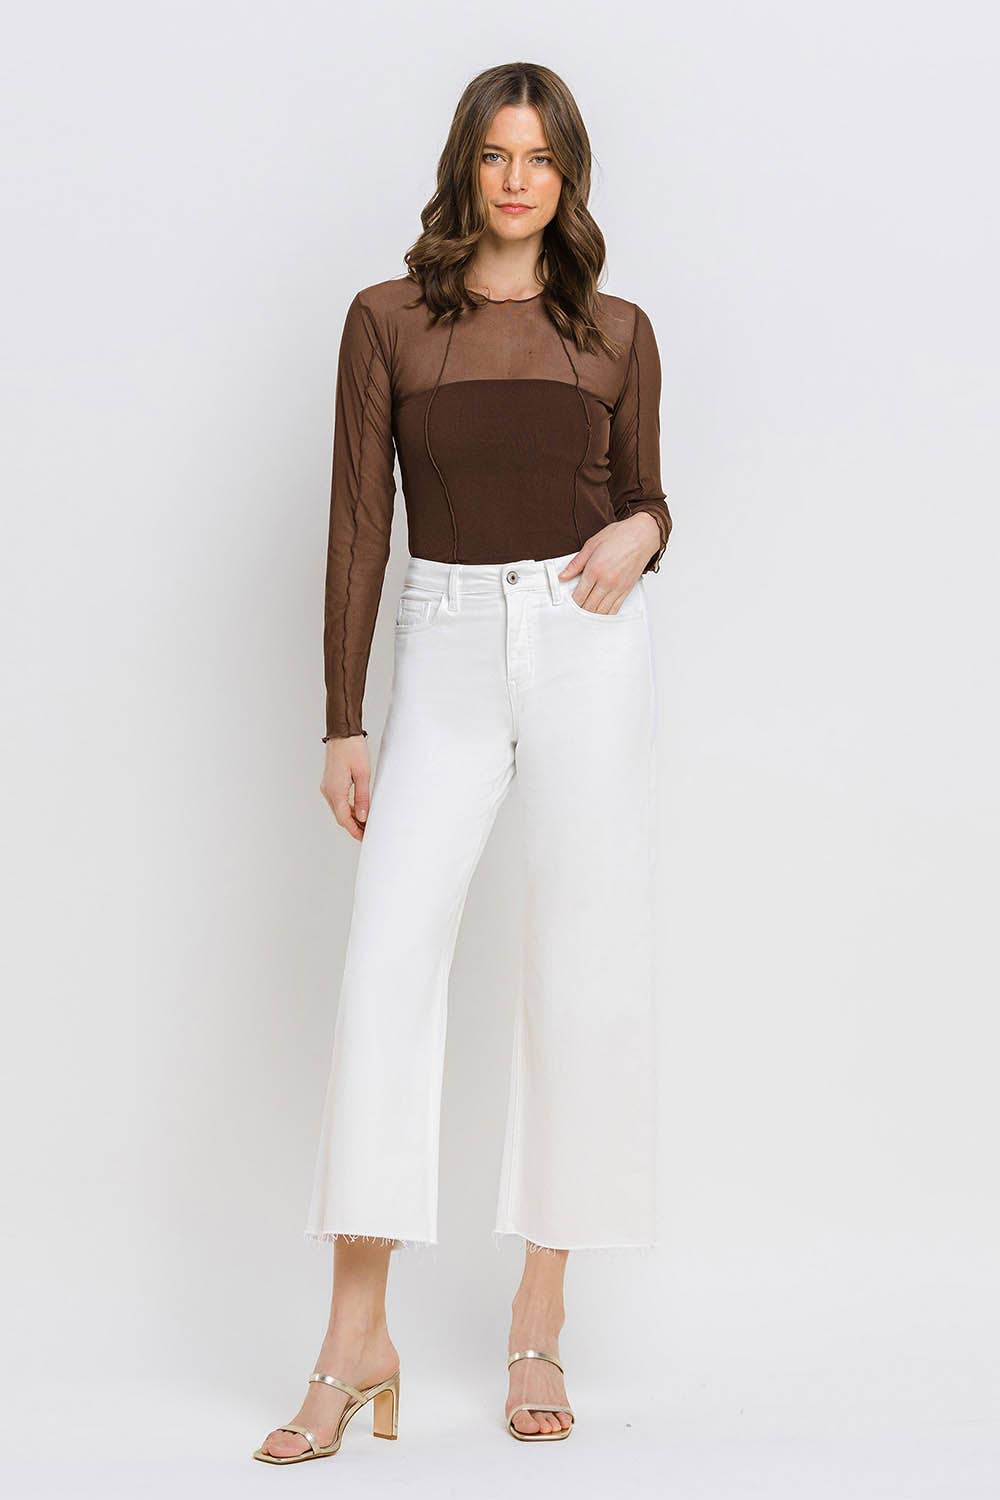 VERVET by FLYING MONKEY - HIGH RISE CROP WIDE LEG JEANS T5894WH: OPTIC WHITE / 32